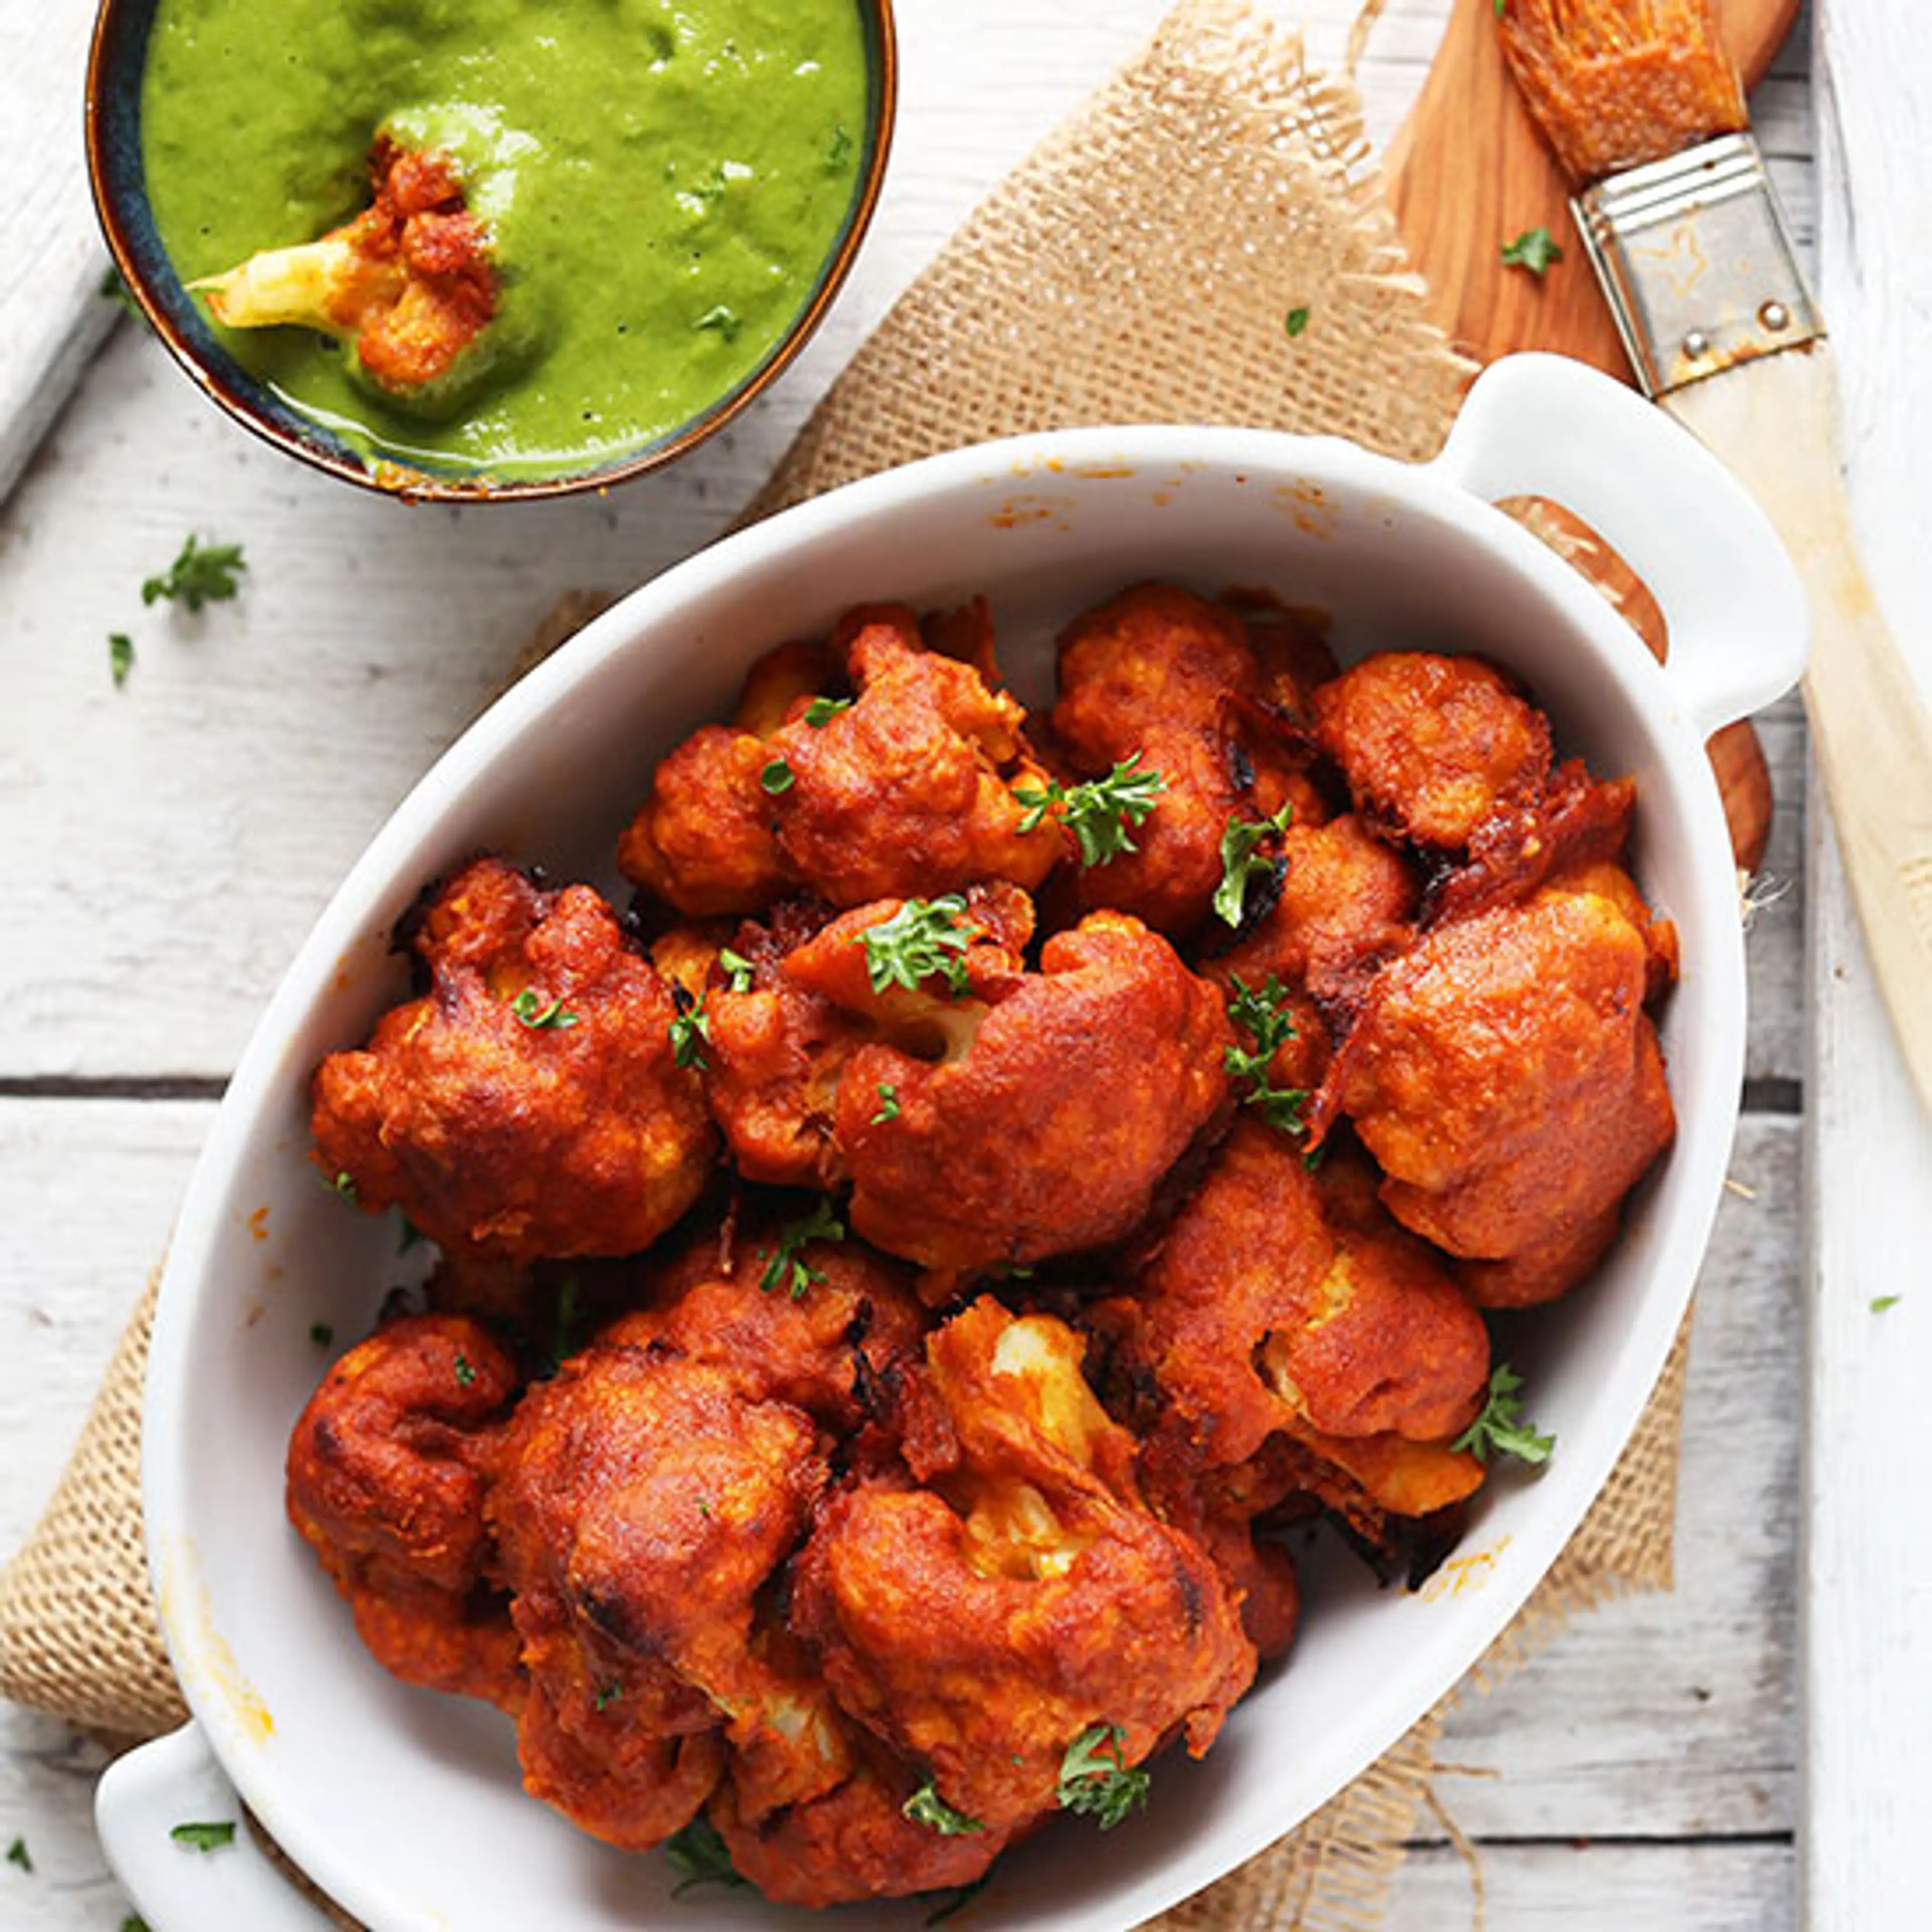 Spicy Red Curry Cauliflower "Wings"